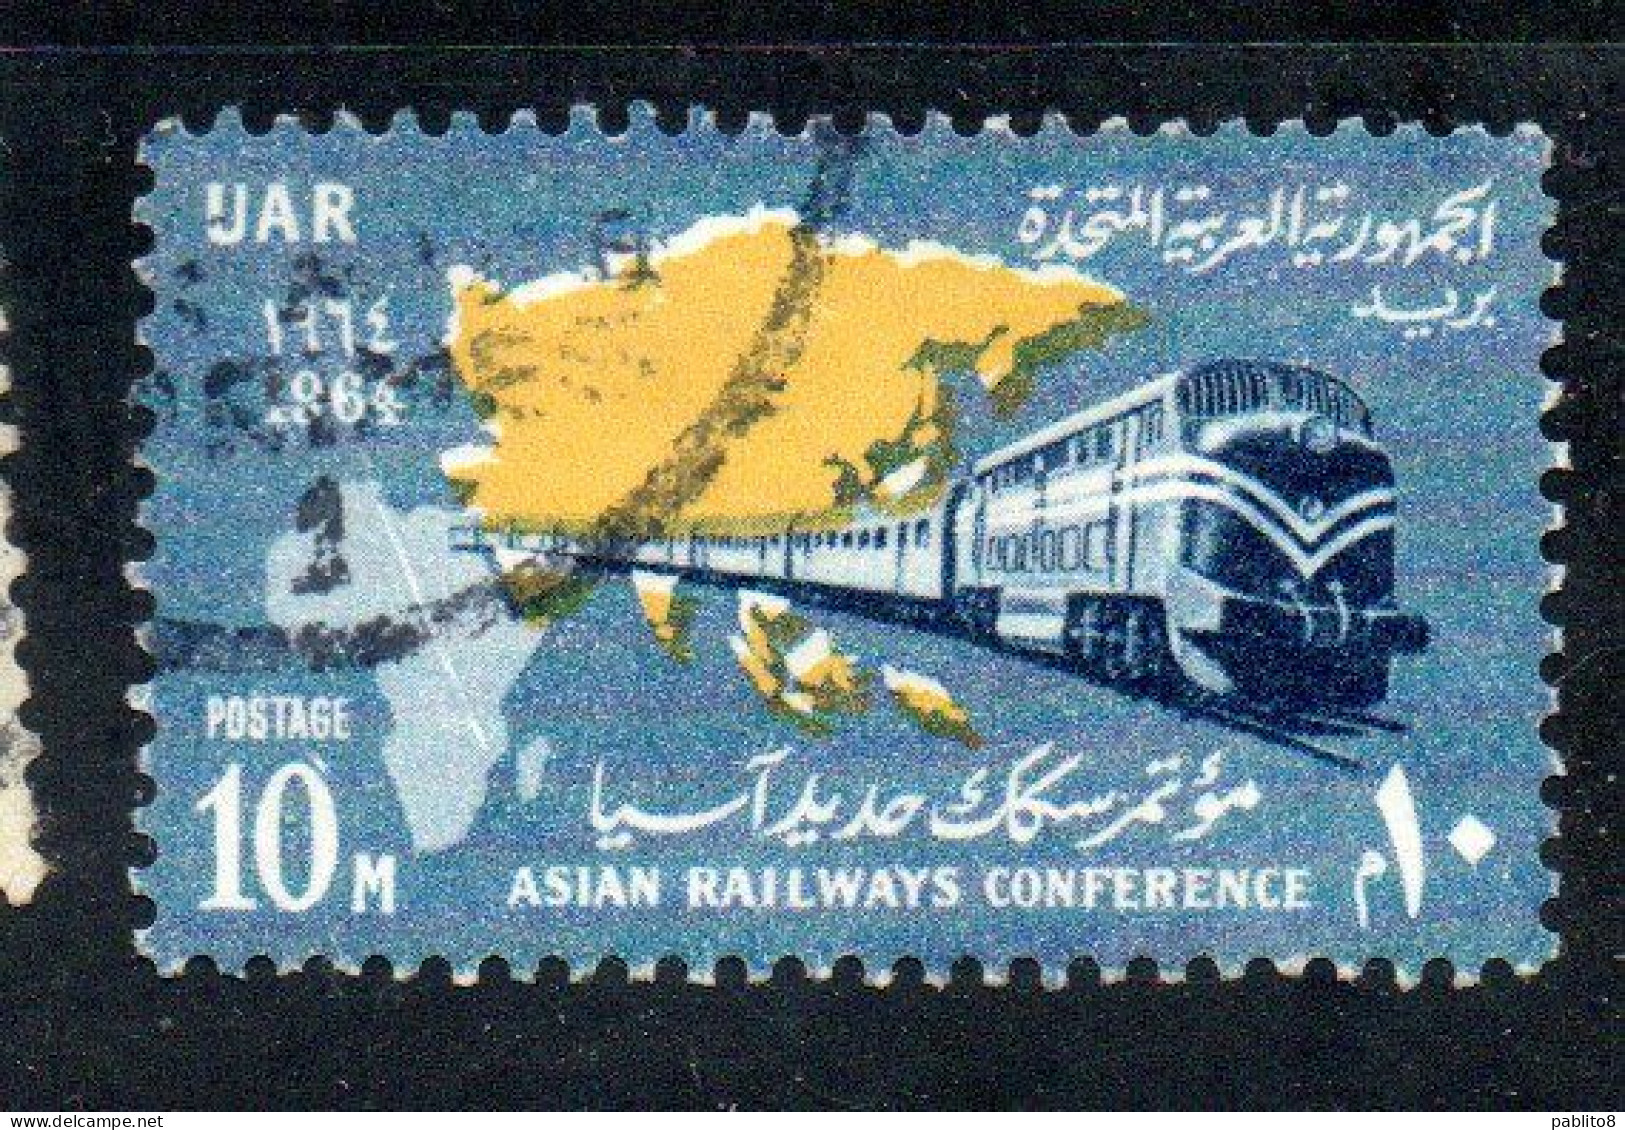 UAR EGYPT EGITTO 1964 ASIAN RAILWAY CONFERENCE CAIRO MAP AND TRAIN 10m USED USATO OBLITERE' - Usados